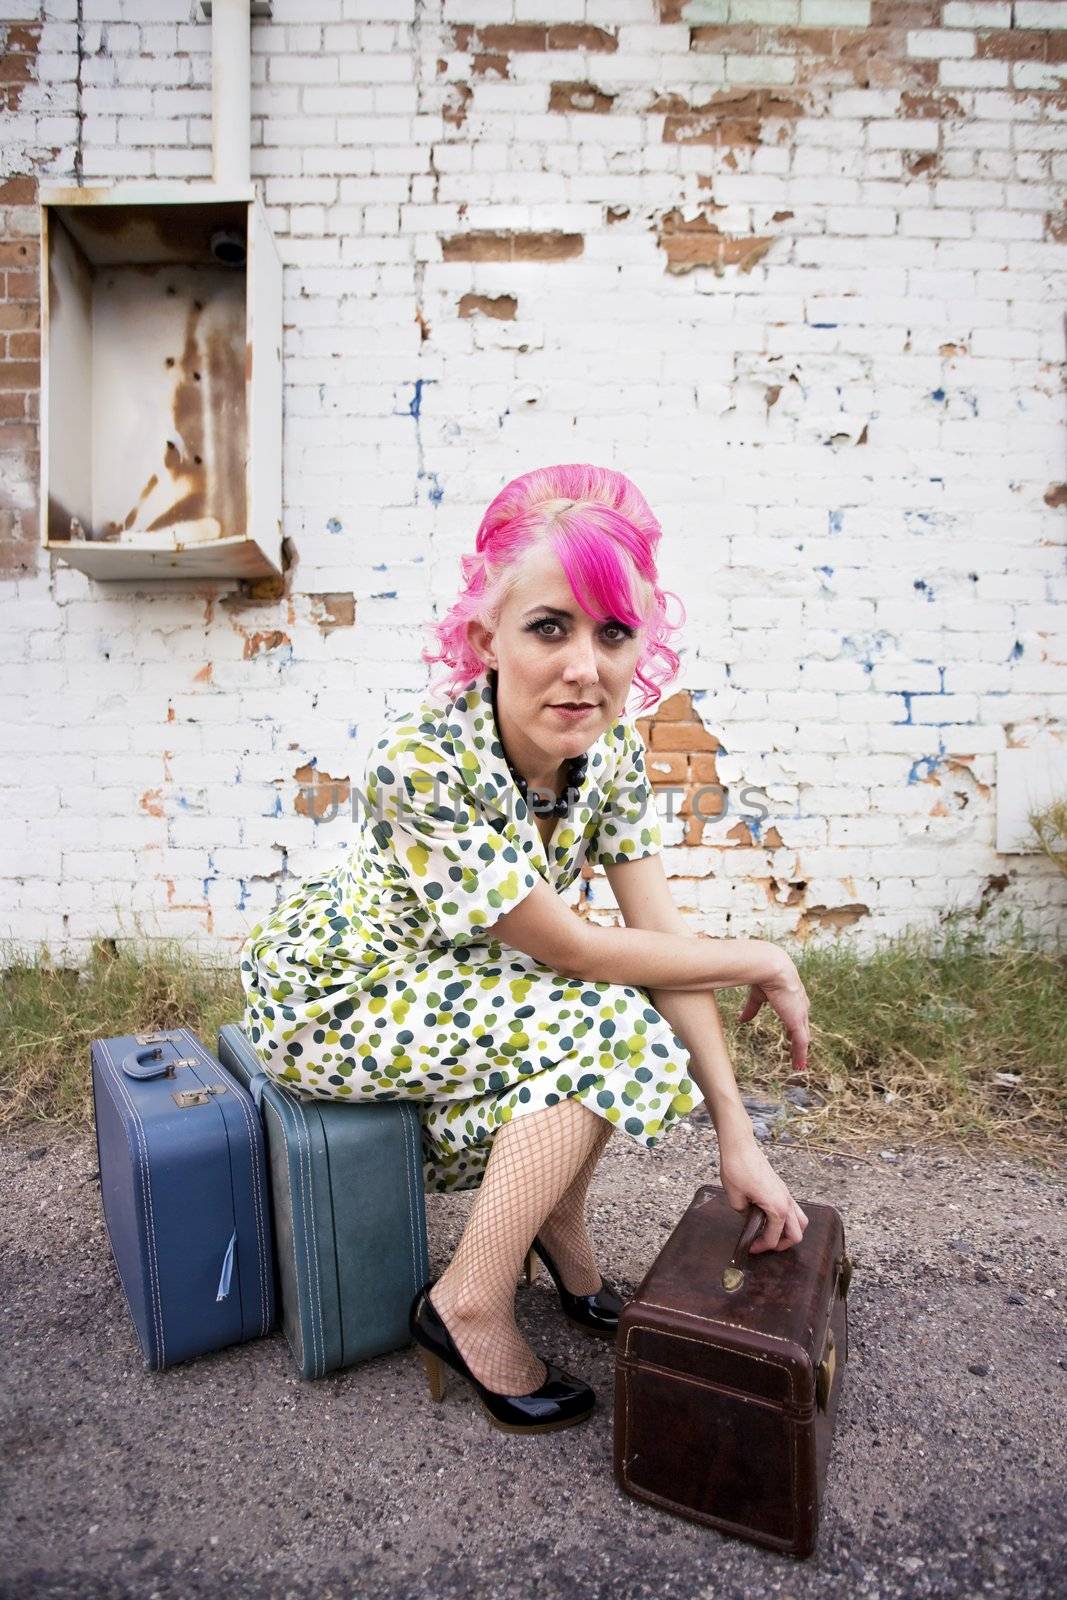 Woman with Pink Hair and a Small Suitcases by Creatista